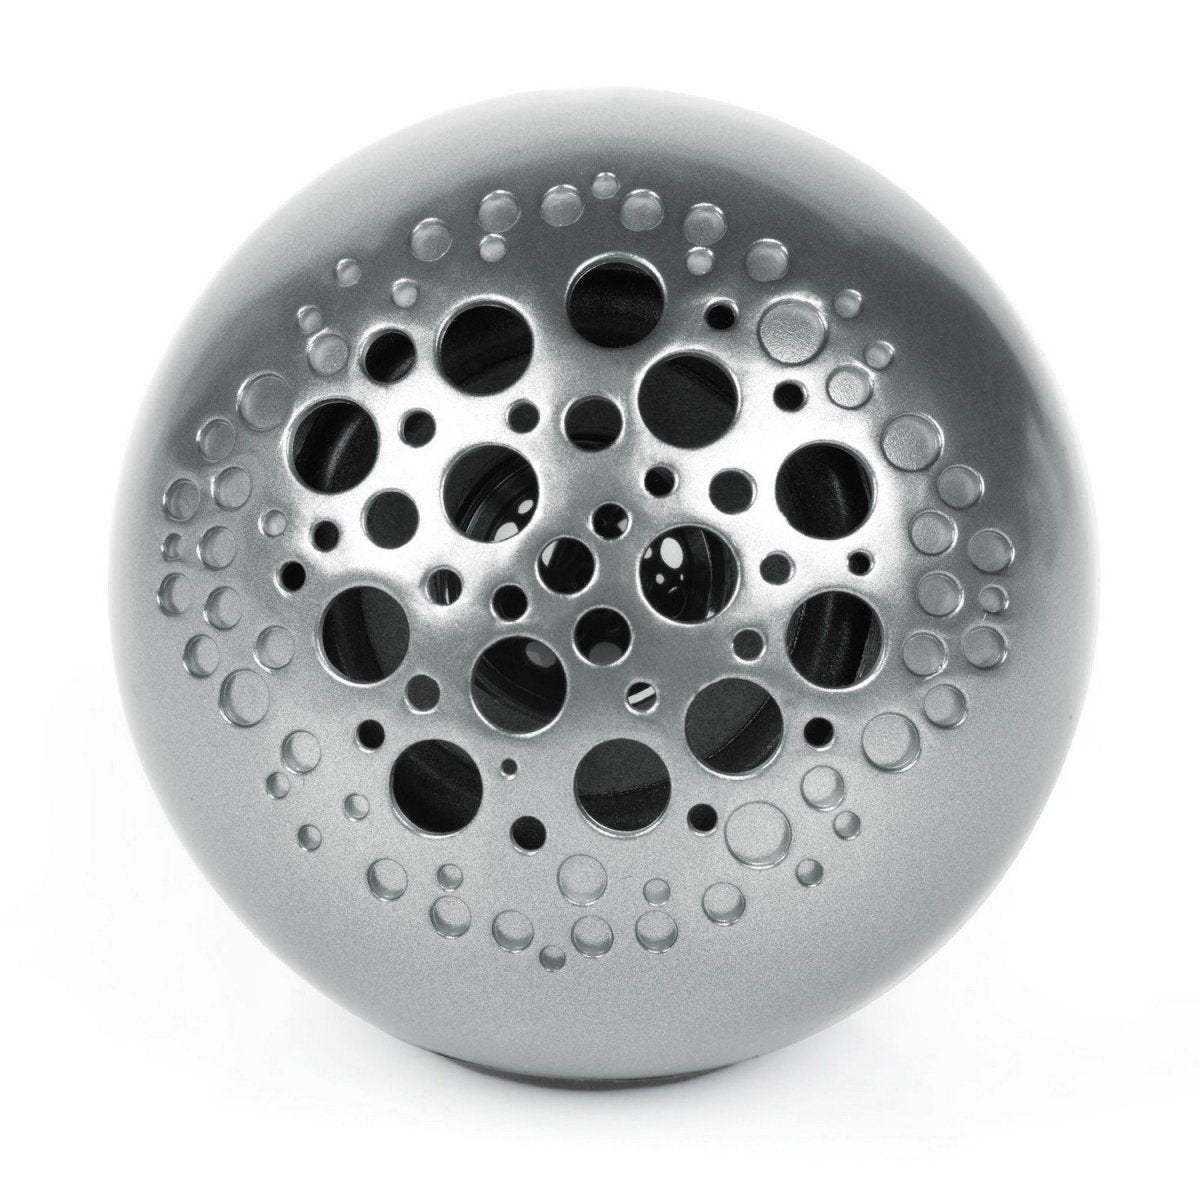 Intempo Portable Bluetooth Rechargeable Ball Speaker Grey - Bonnypack